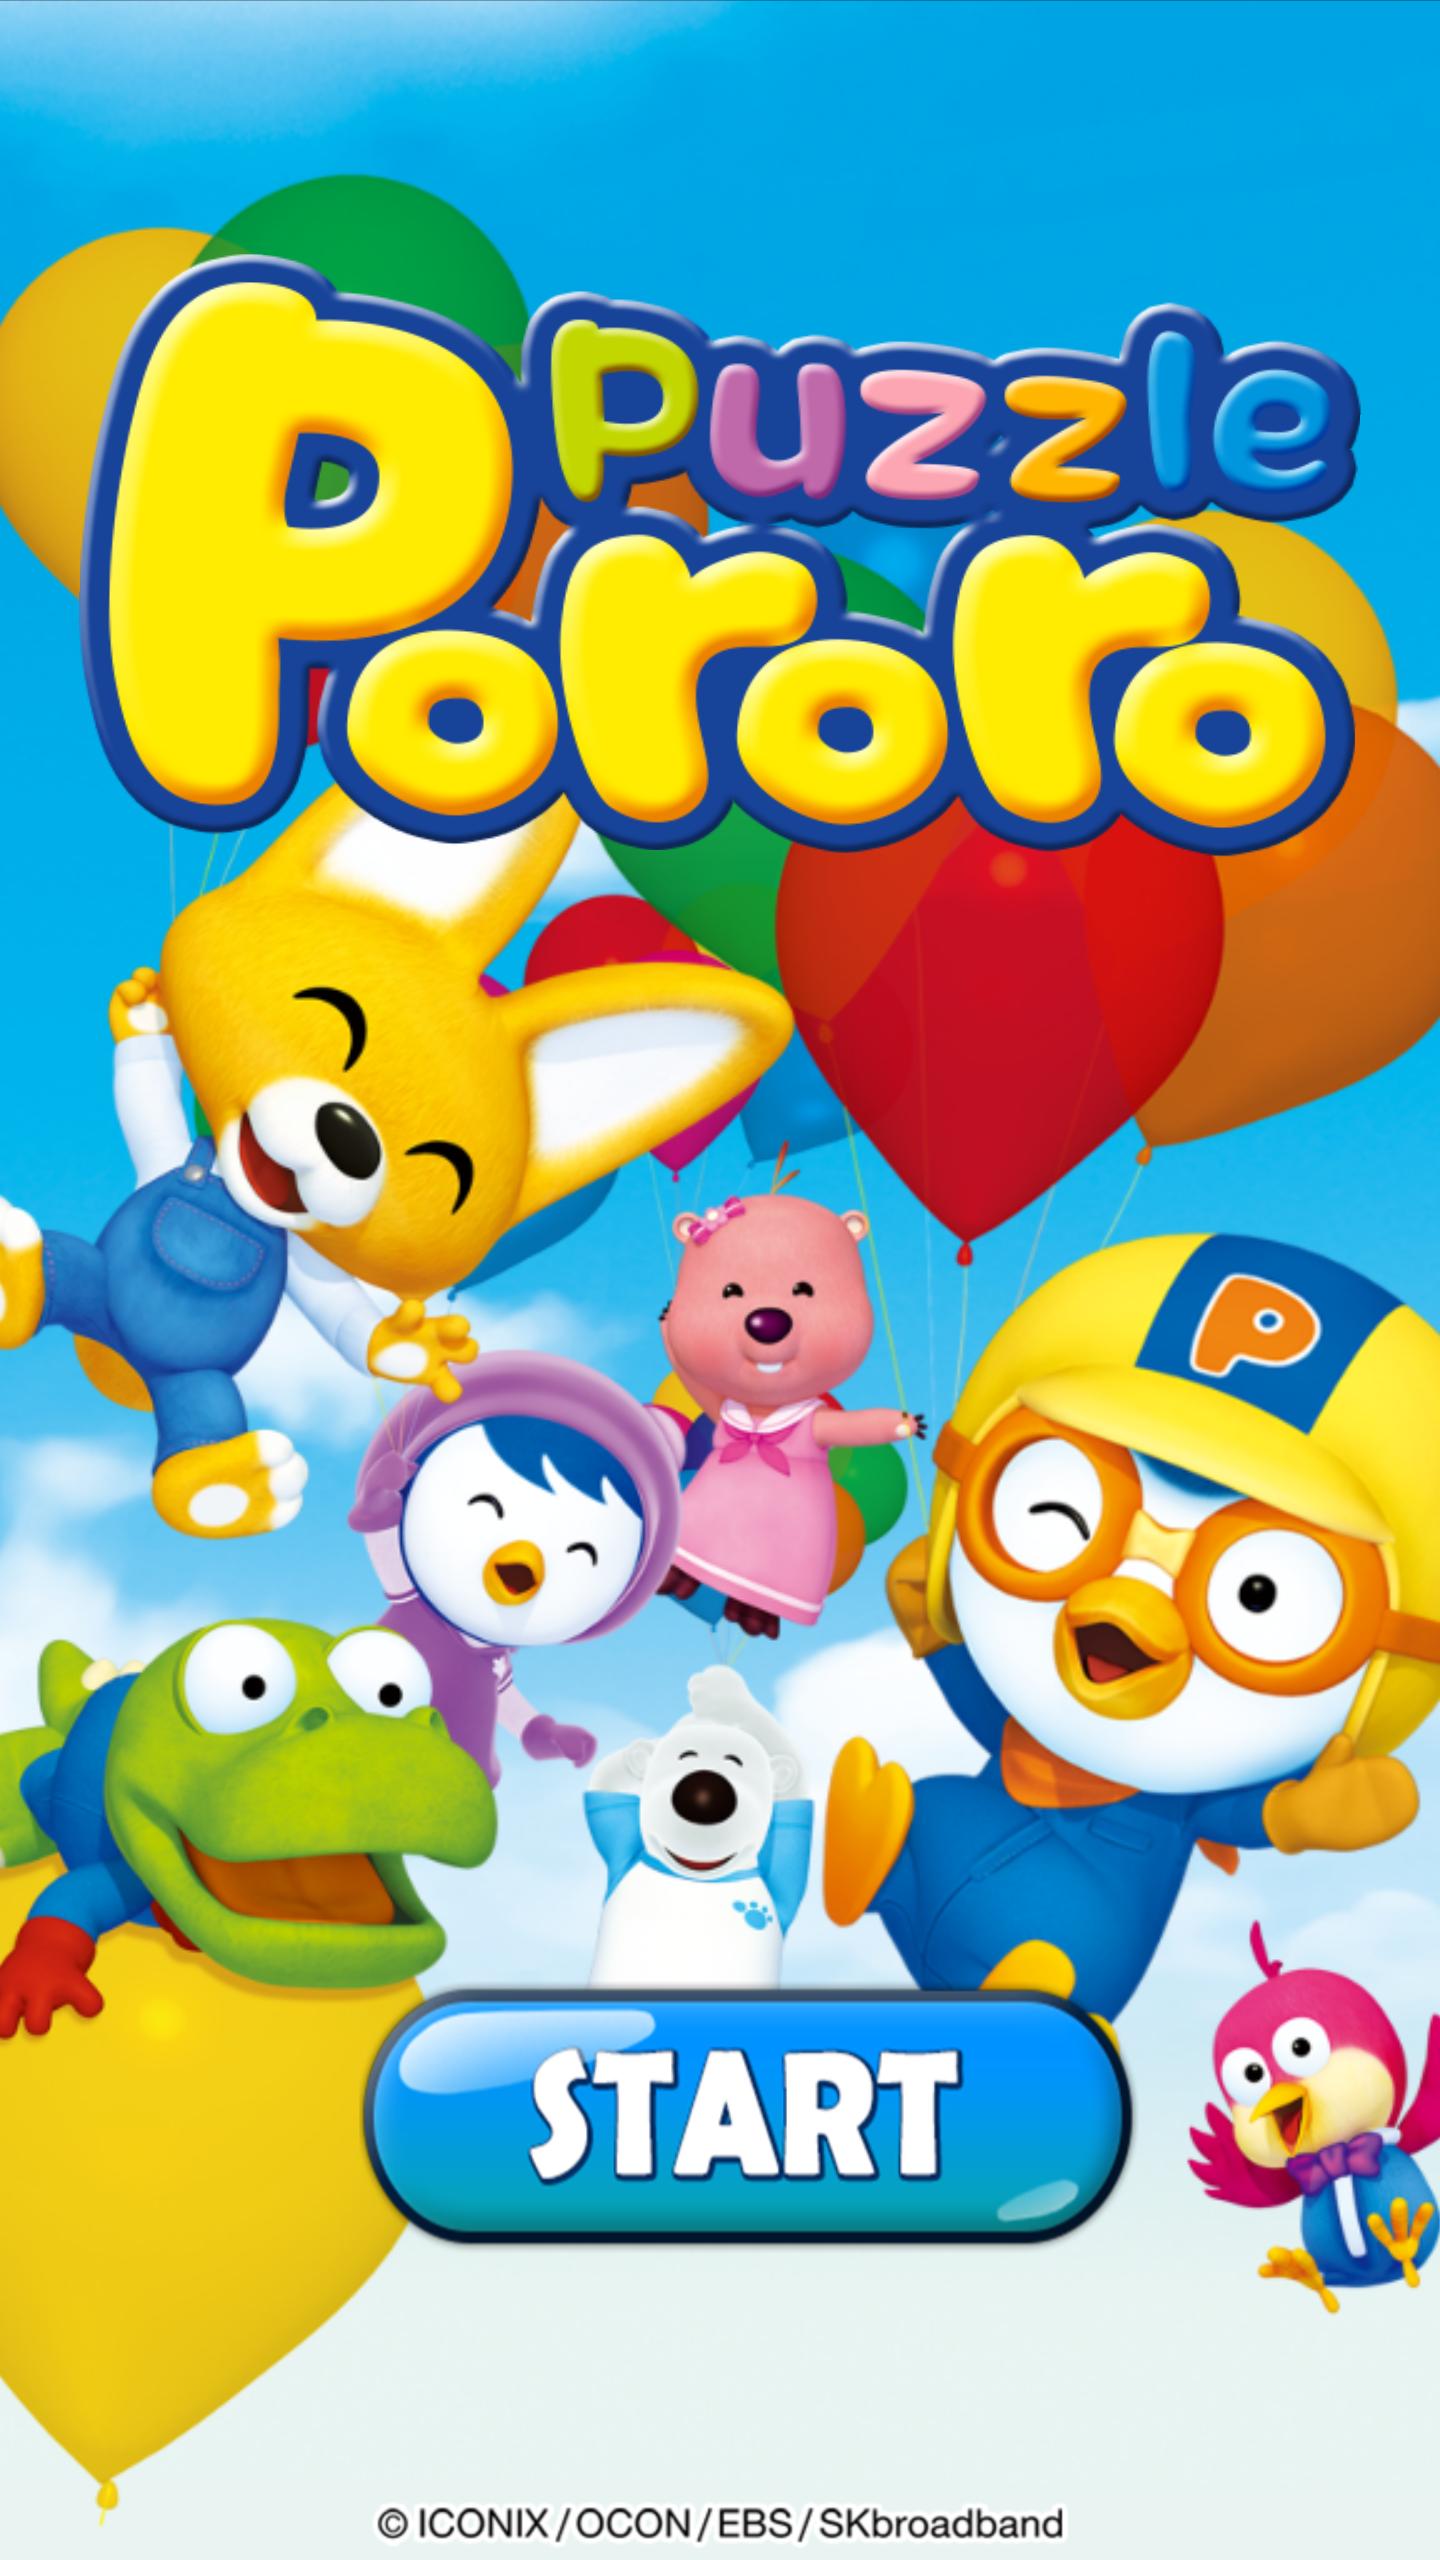 Puzzle Pororo for Android - APK Download